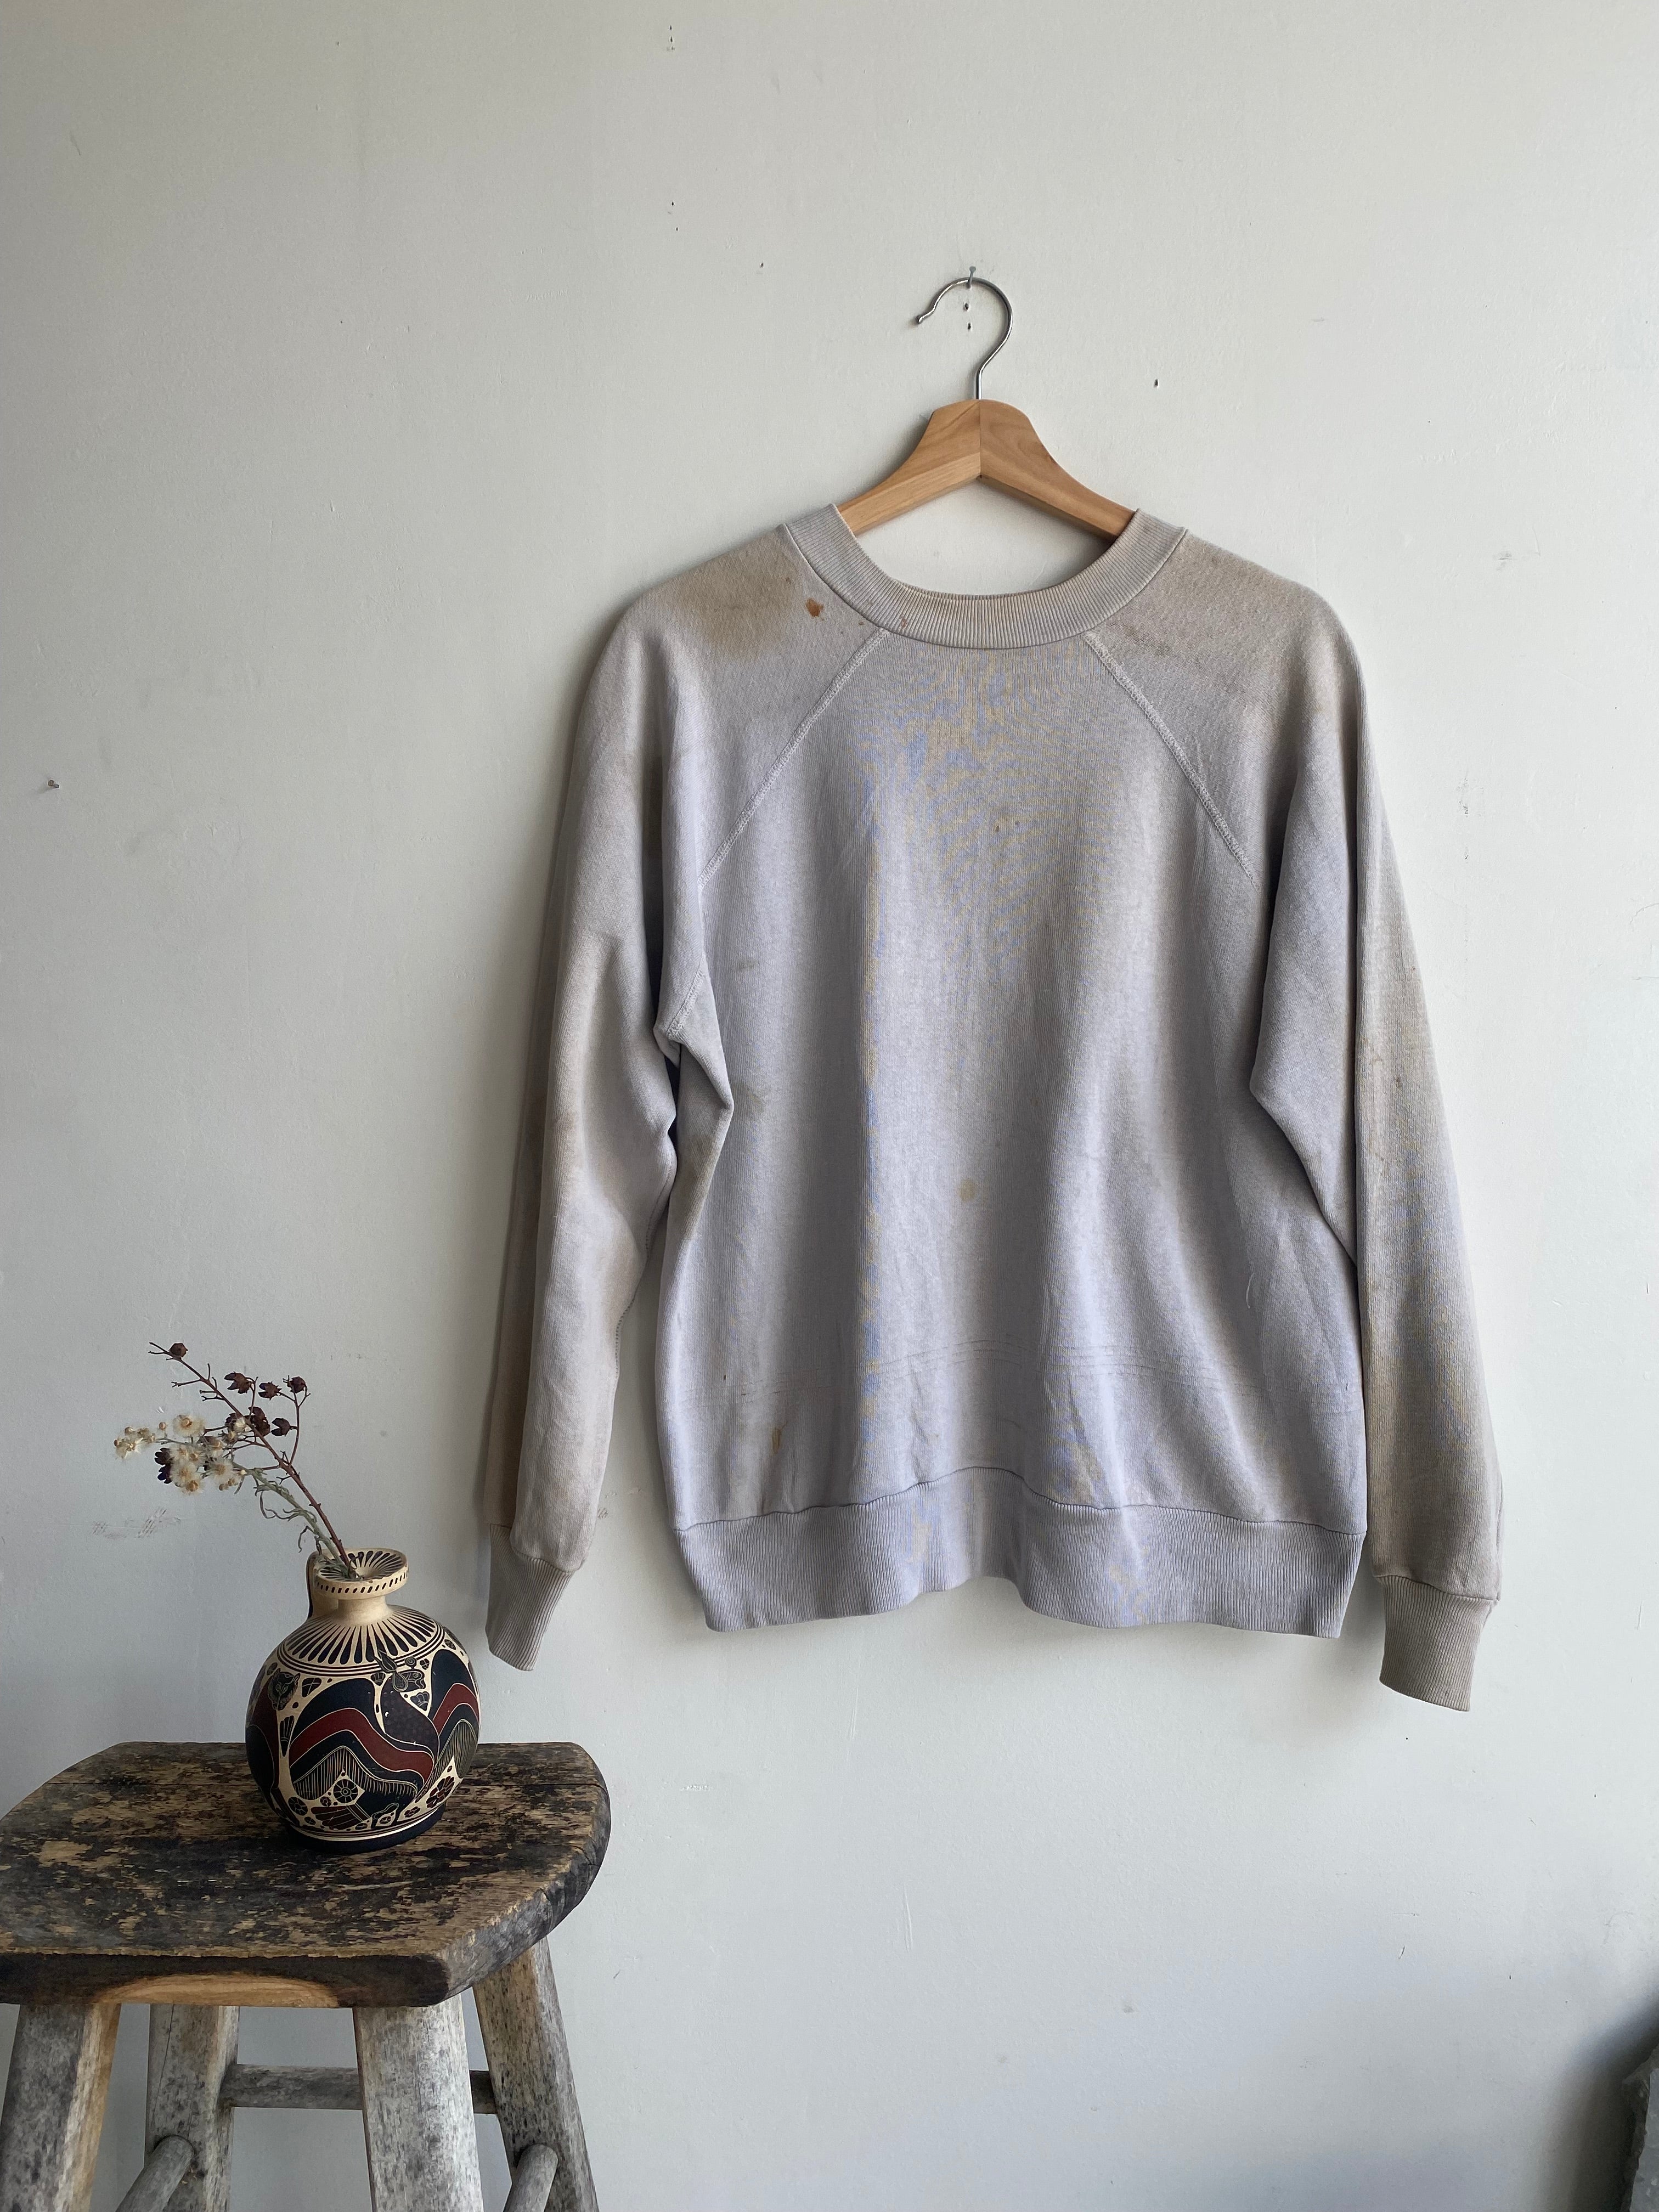 1970s Stained Blank Taupe Sweatshirt (Boxy M)